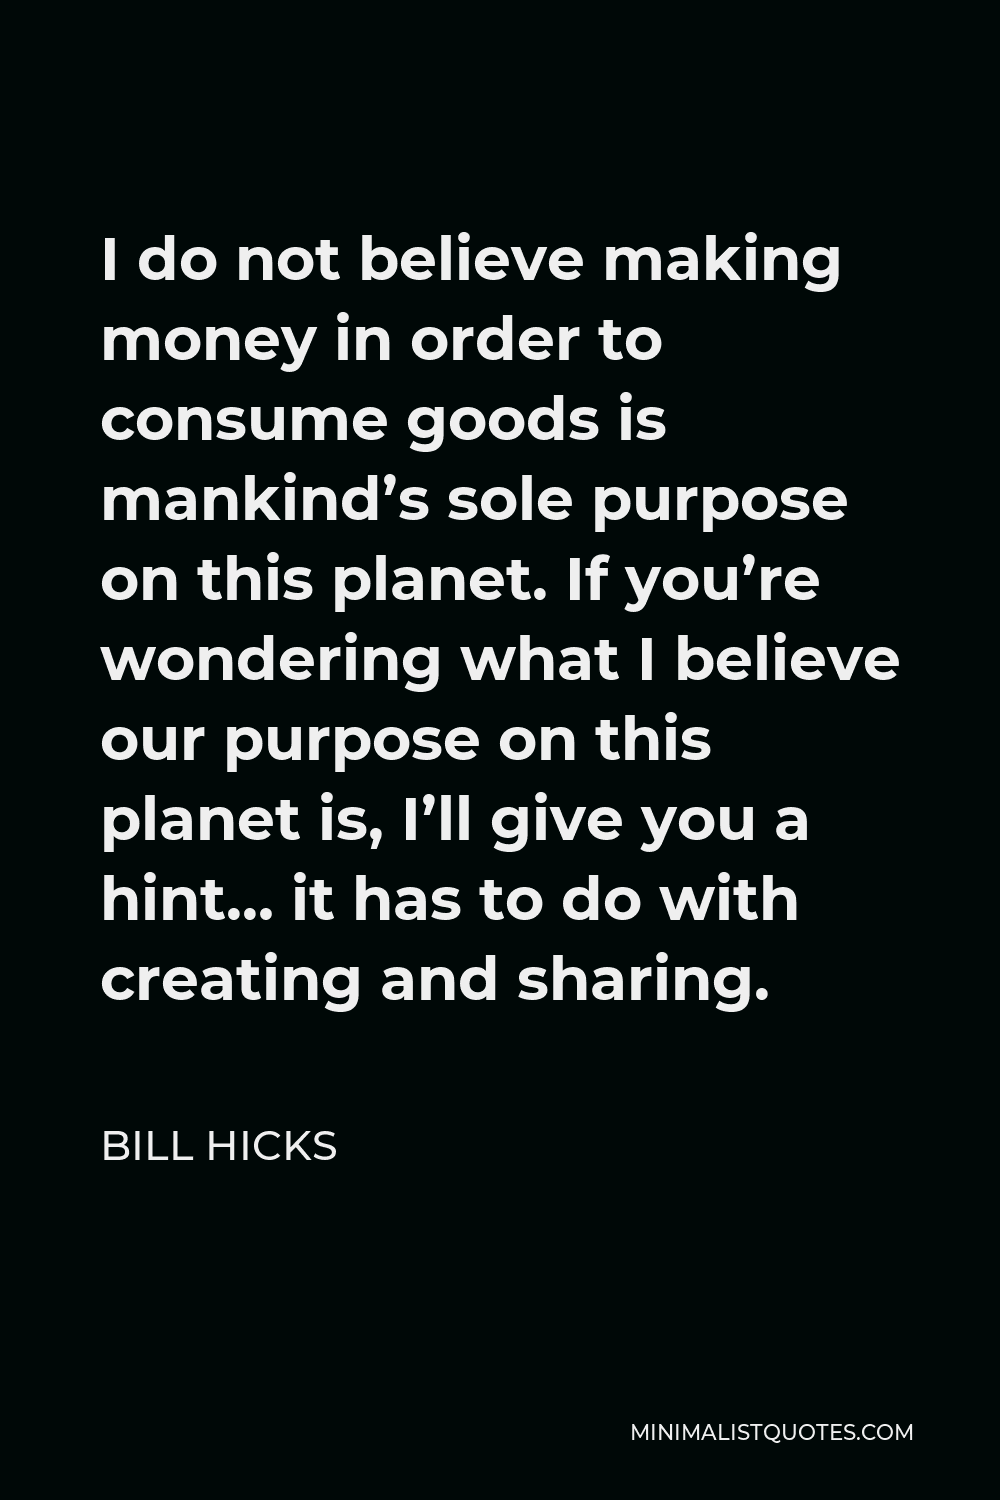 Bill Hicks Quote - I do not believe making money in order to consume goods is mankind’s sole purpose on this planet. If you’re wondering what I believe our purpose on this planet is, I’ll give you a hint… it has to do with creating and sharing.